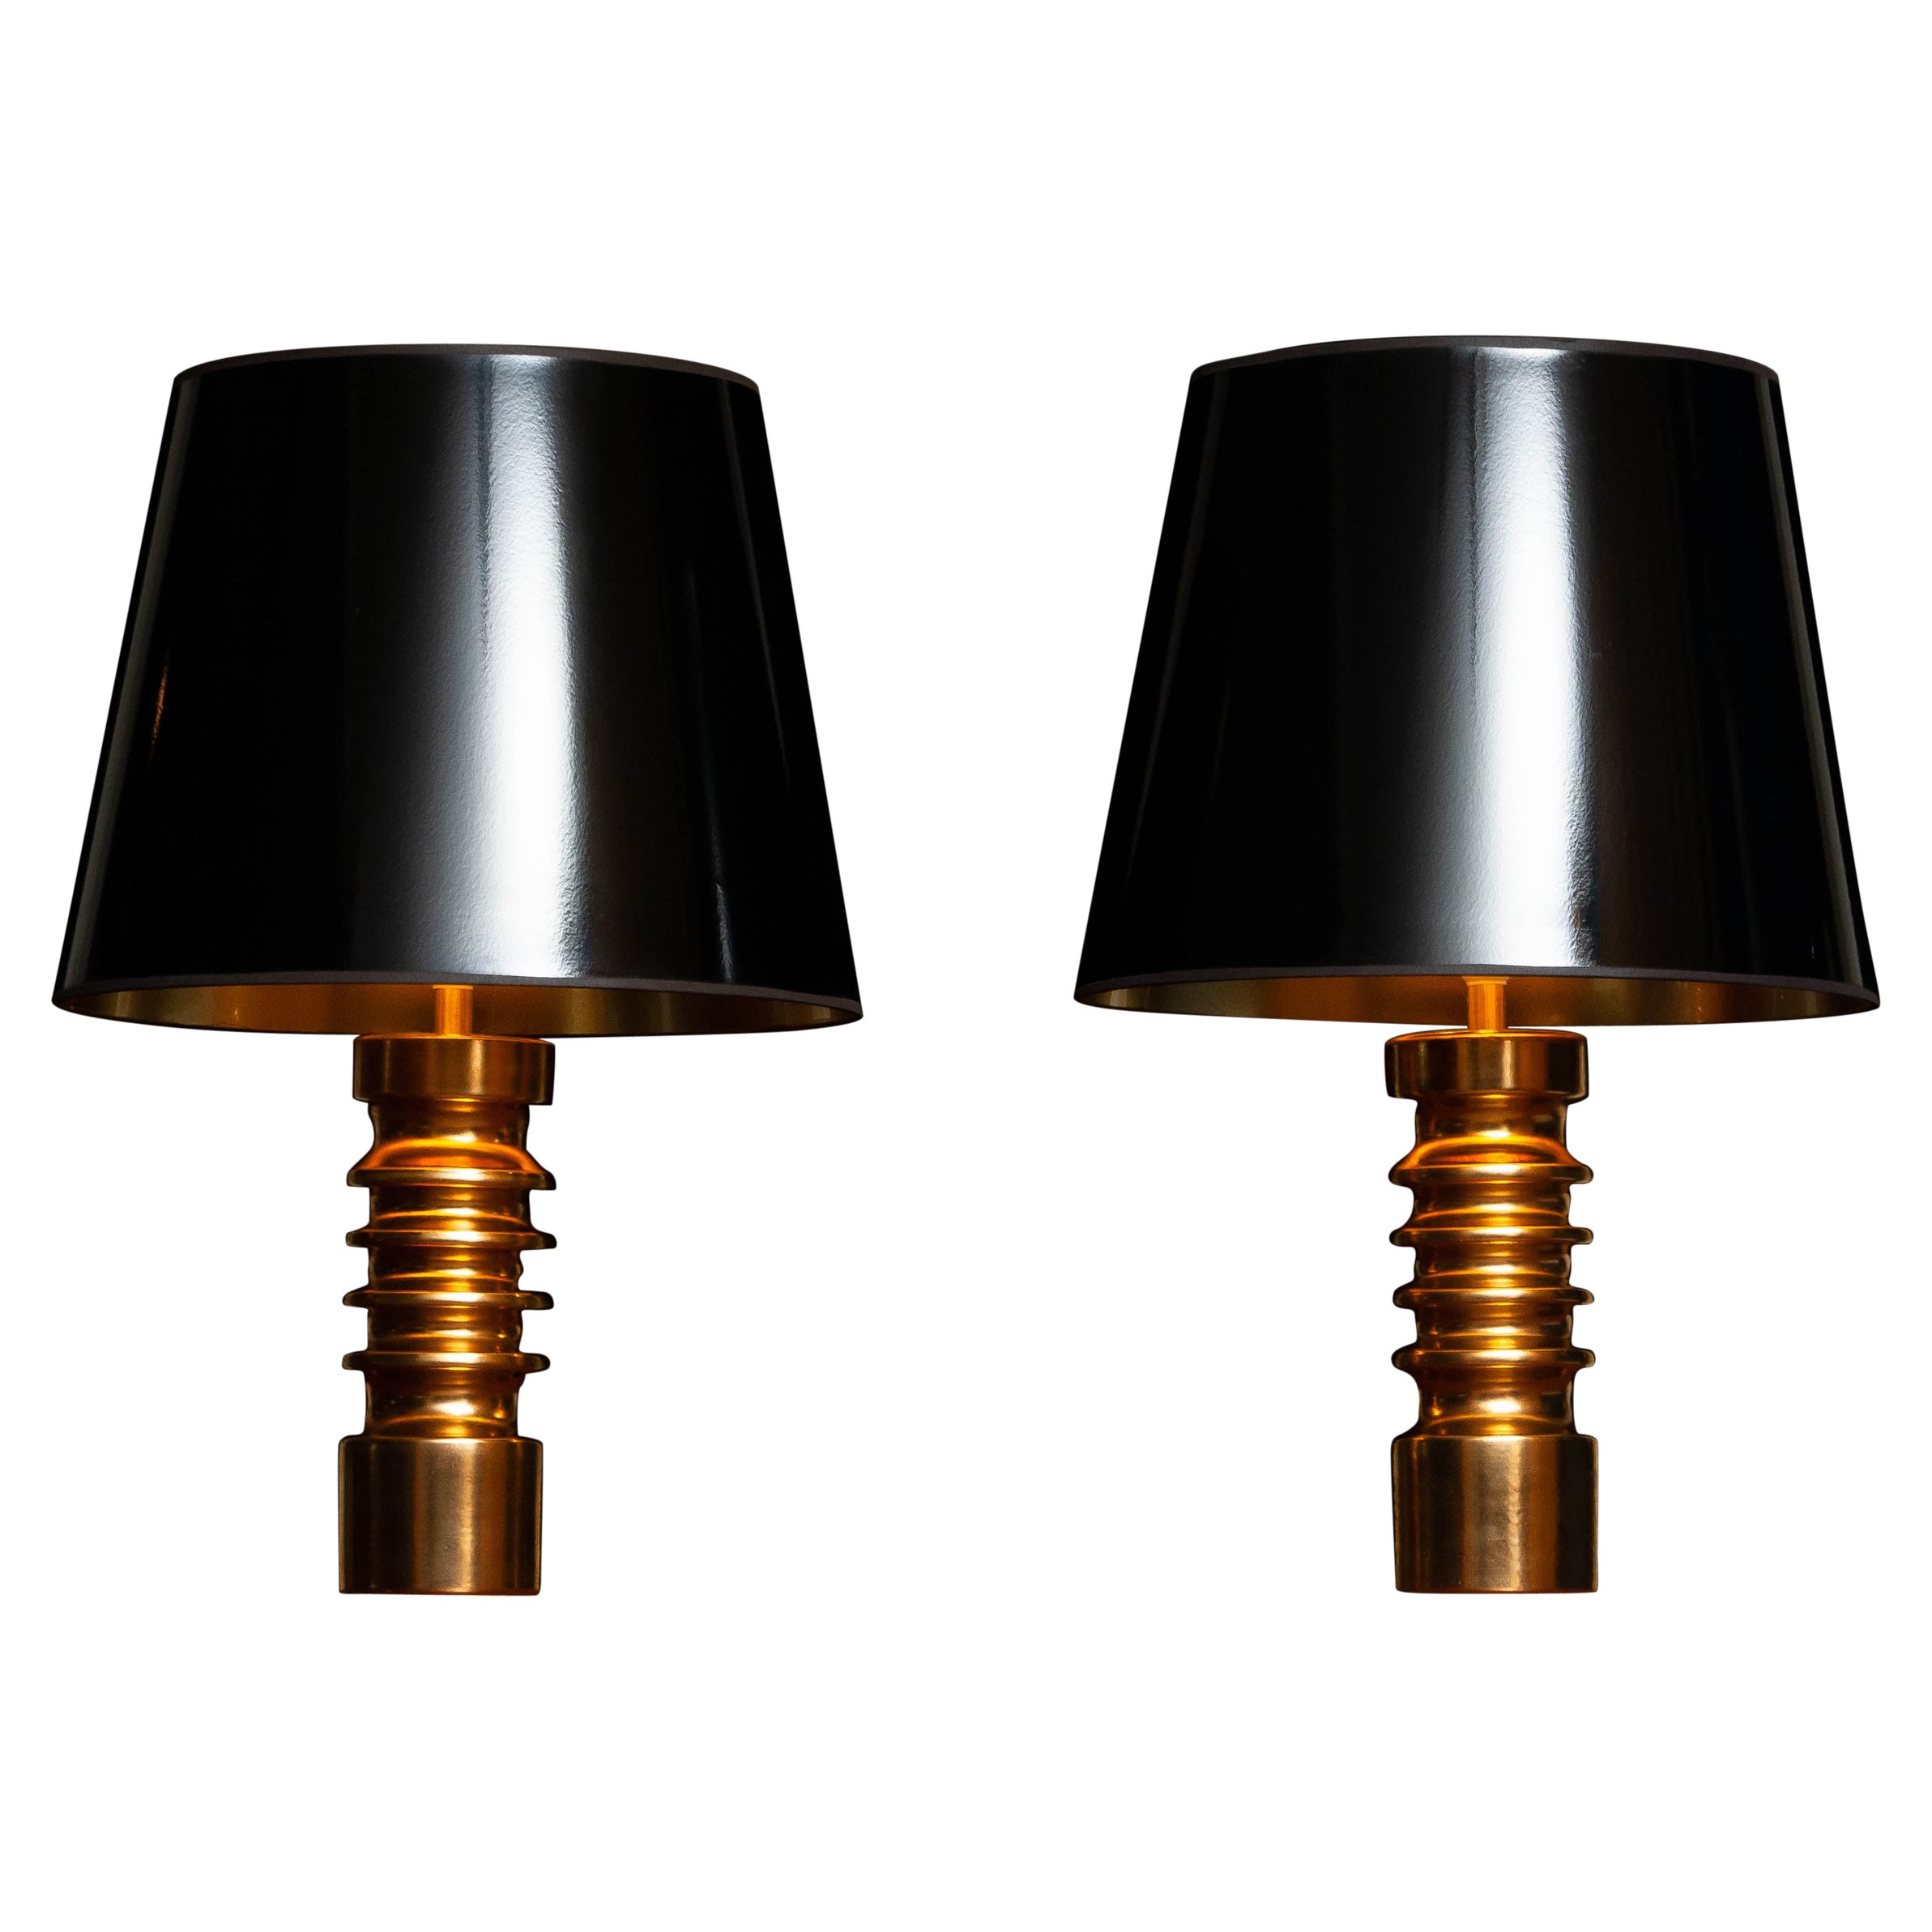 1960's Pair of Italian Gold Glazed Ceramic Table Lamps Attributed to Bitossi